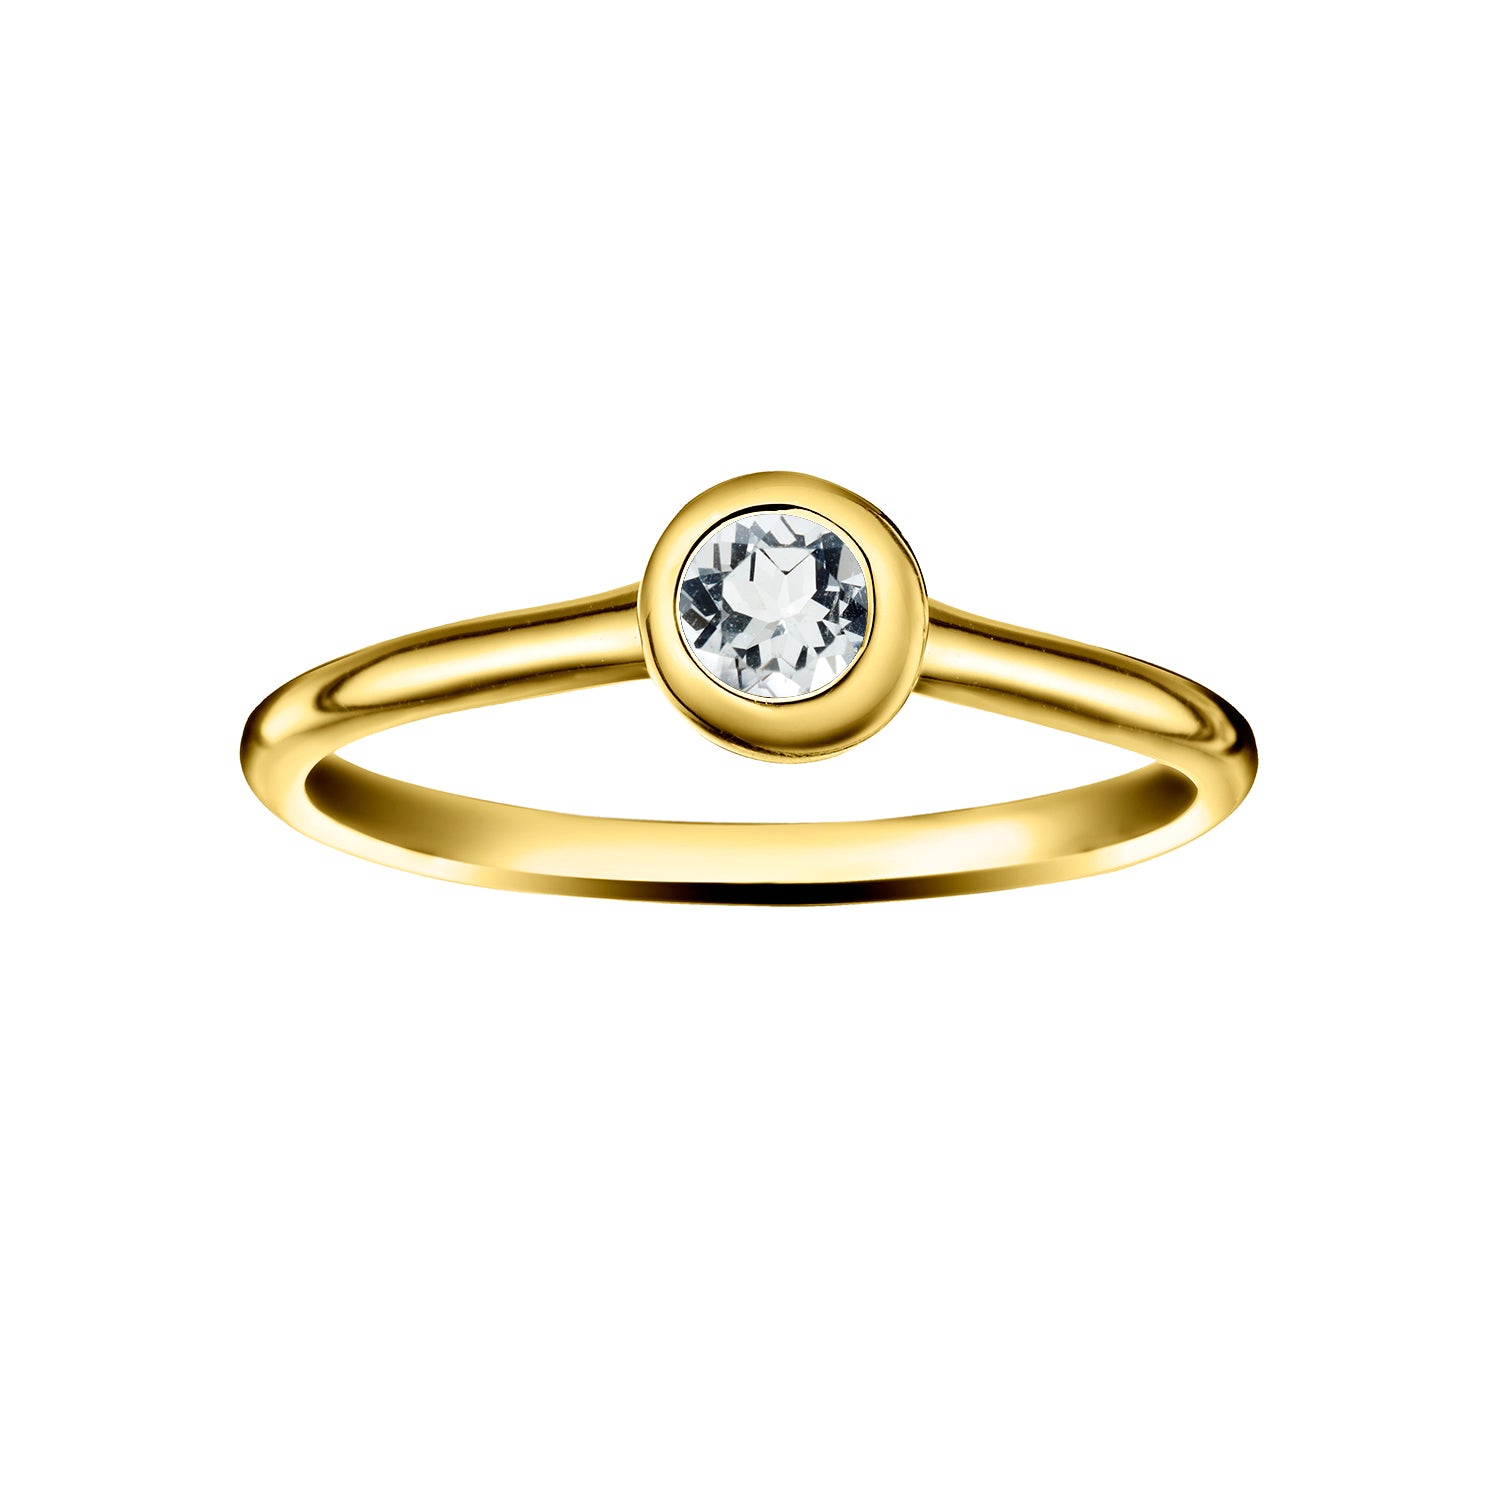 Polished Gold Vermeil Crescent Moon Stacking Birthstone Rings - April / White Topaz